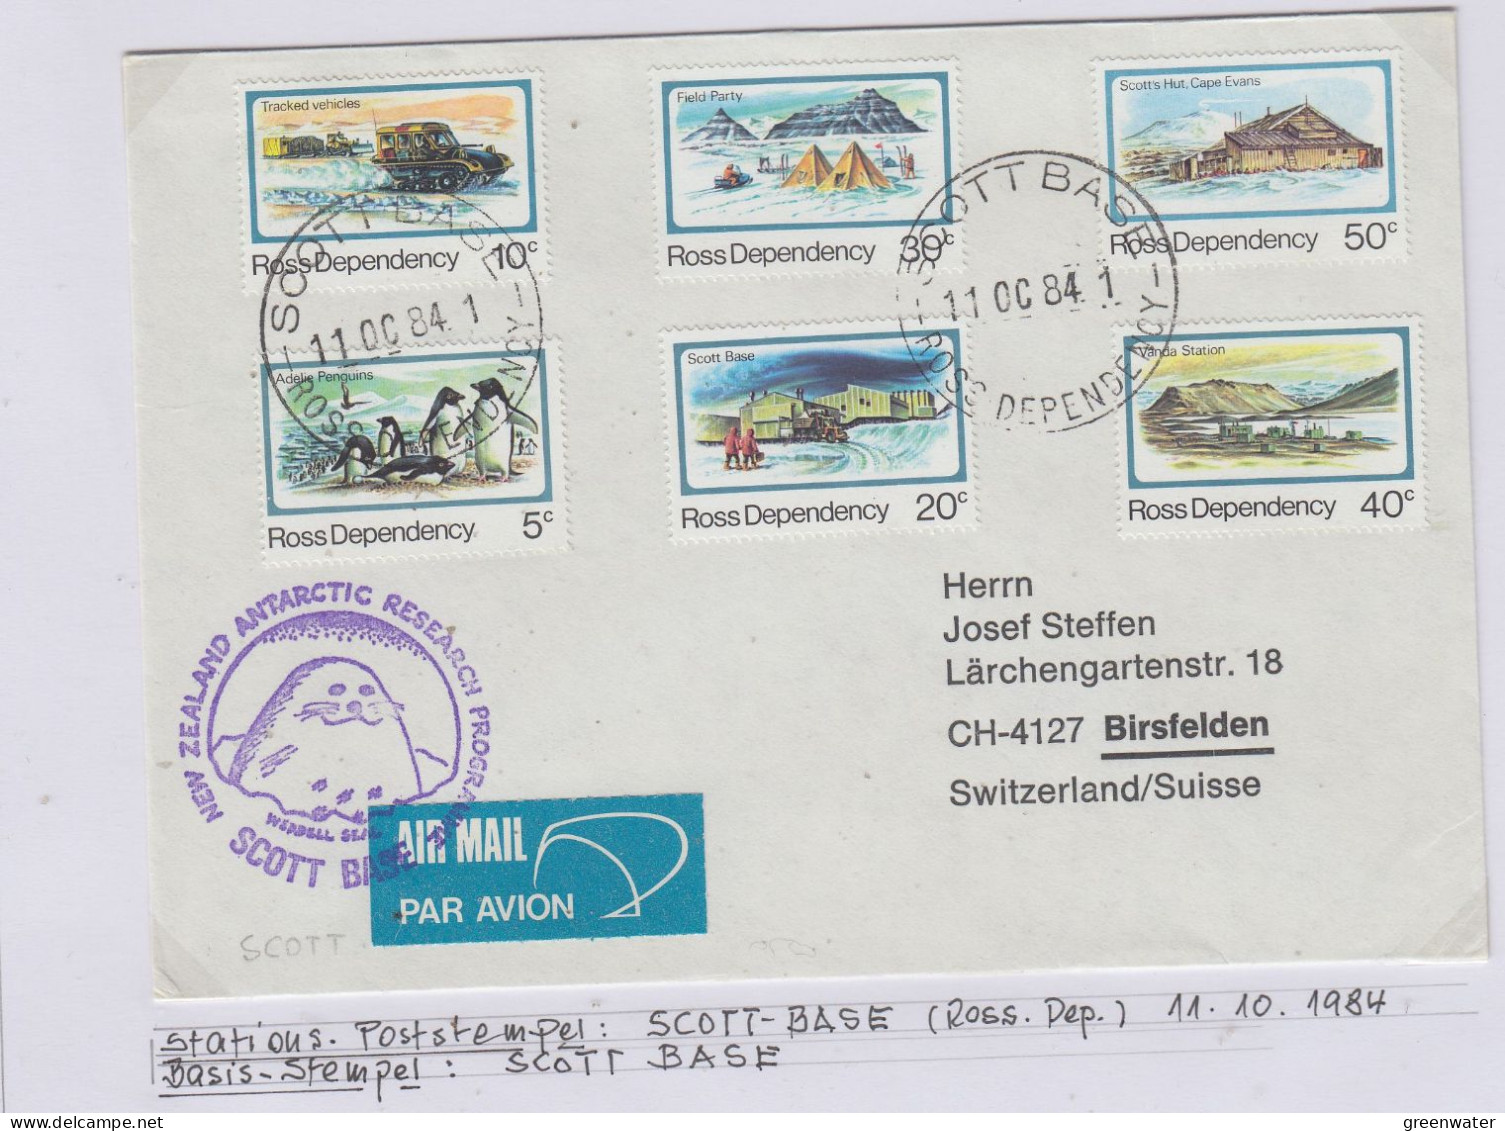 Ross Dependency Cover  NZ  Antarctic Research  Expedition Ca Scott Base 11 OCT 1984 (WB164C) - Lettres & Documents